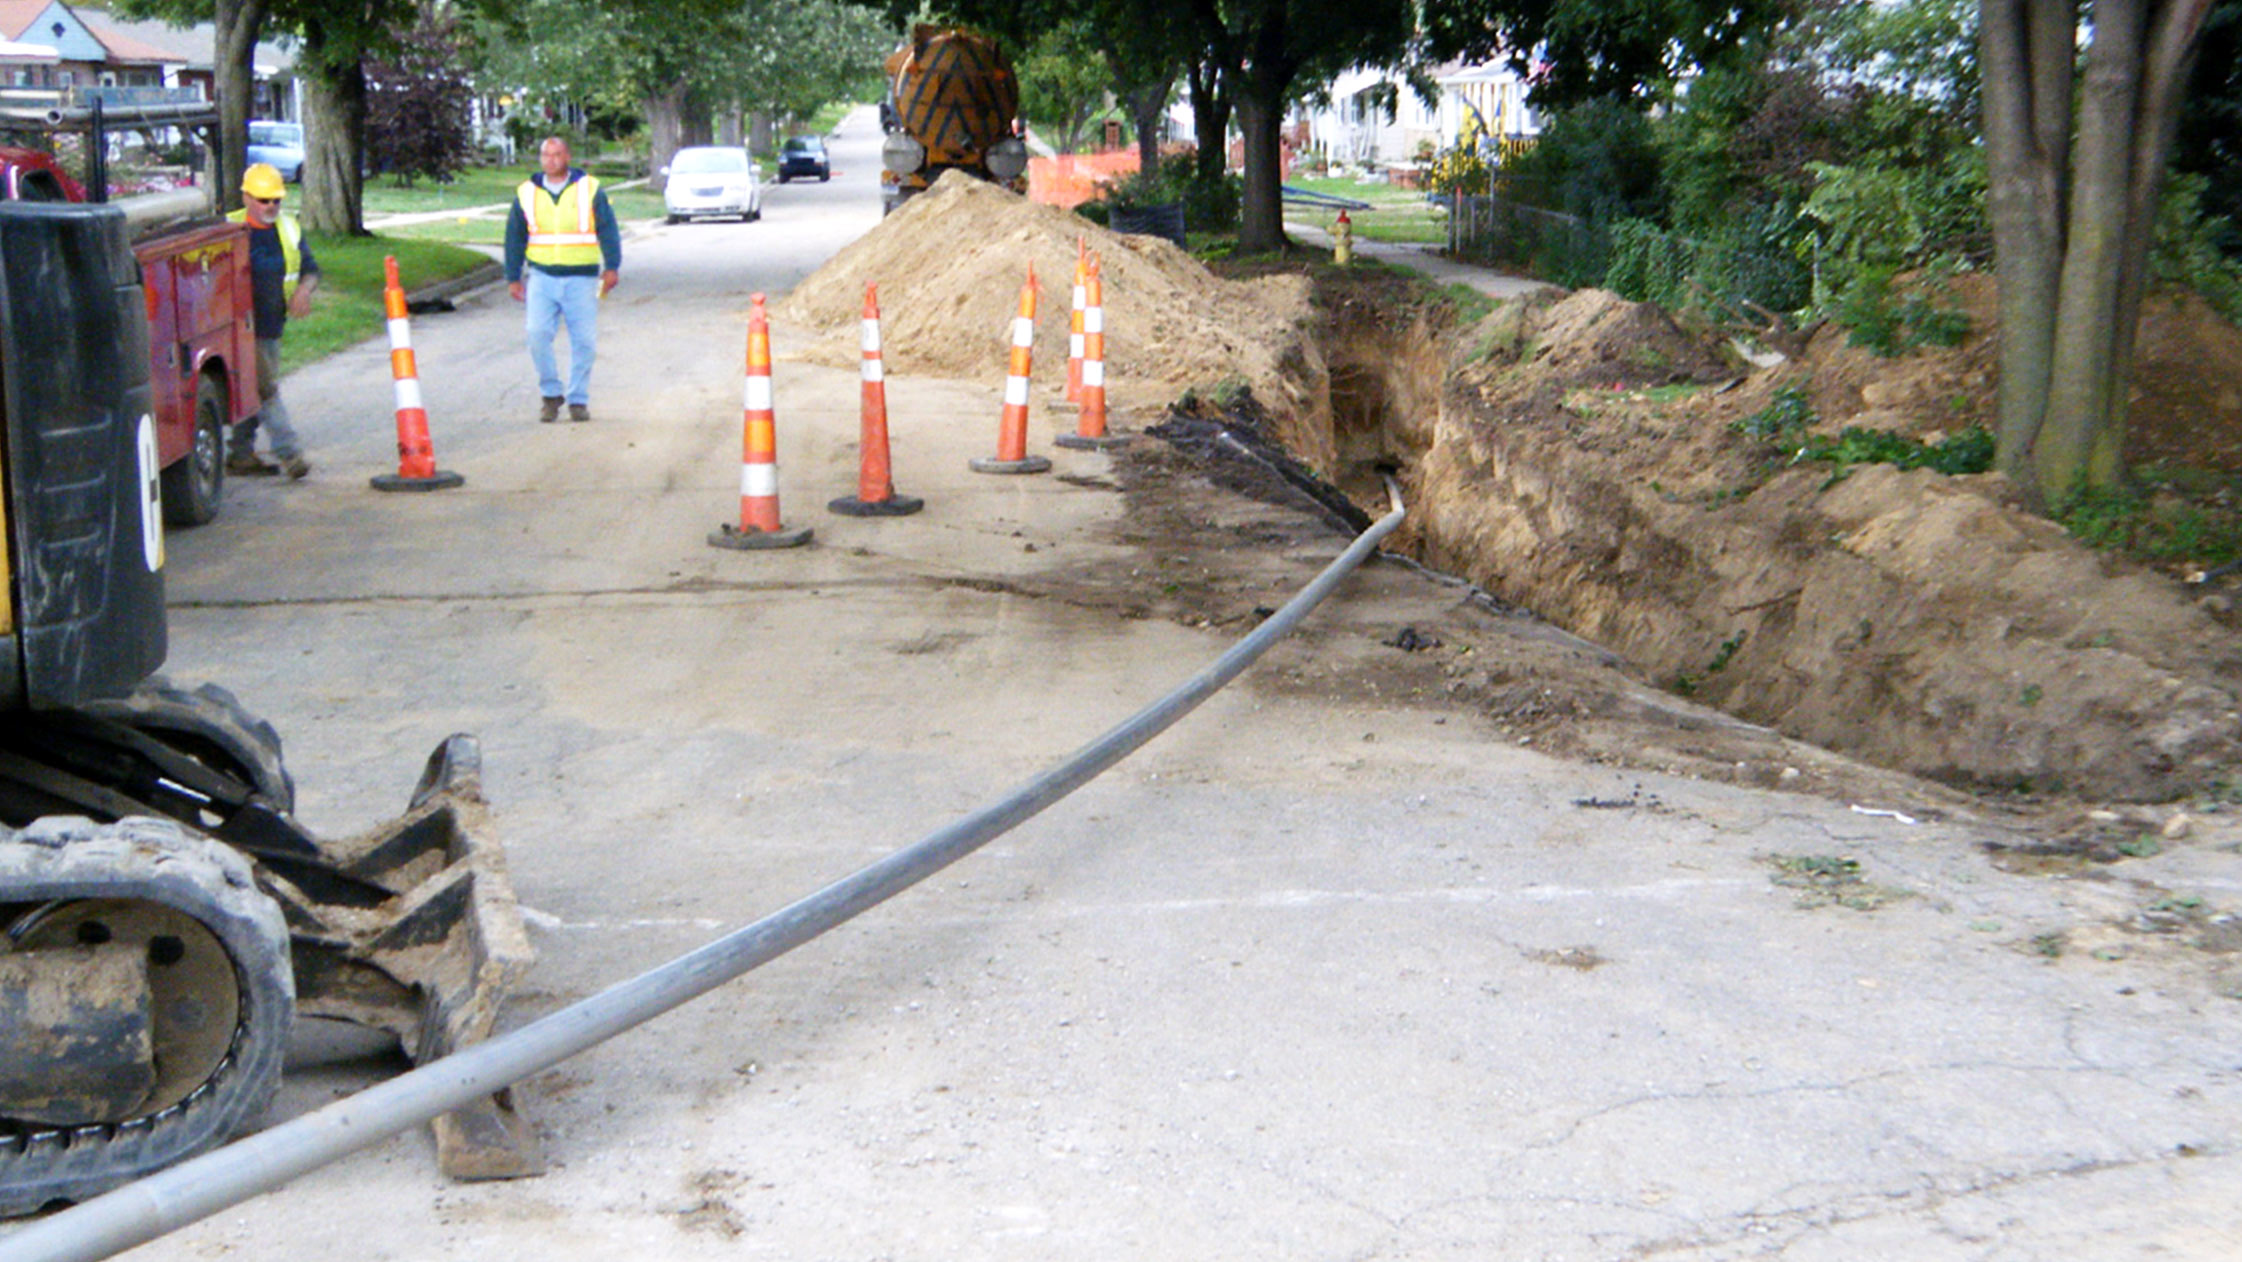 OHM Advisors uses trenchless technology to repair and replace underground pipes.